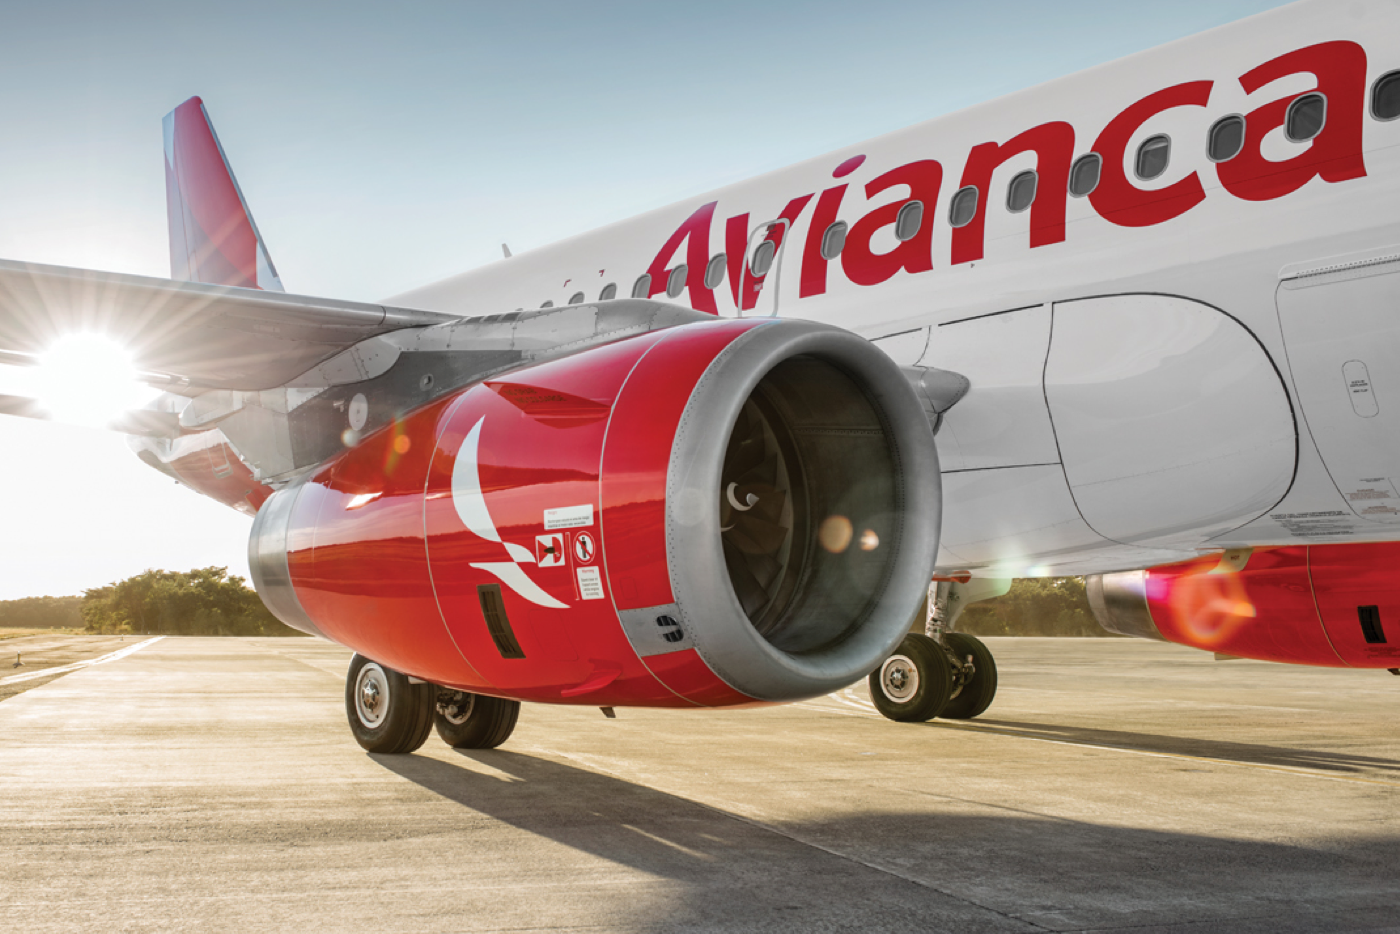 Avianca, American Airlines, and Spirit
